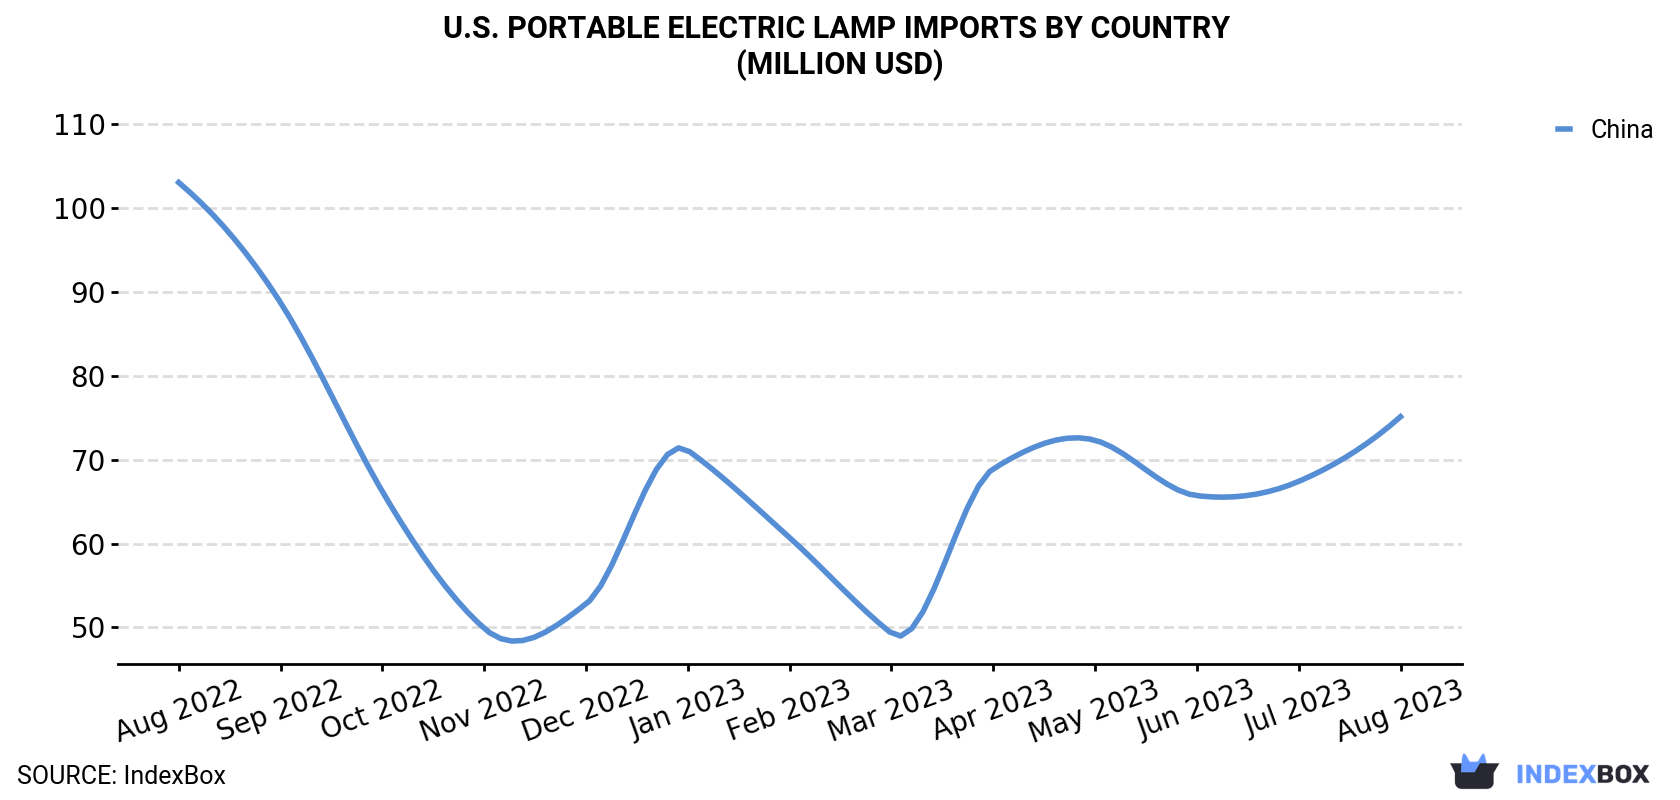 U.S. Portable Electric Lamp Imports By Country (Million USD)